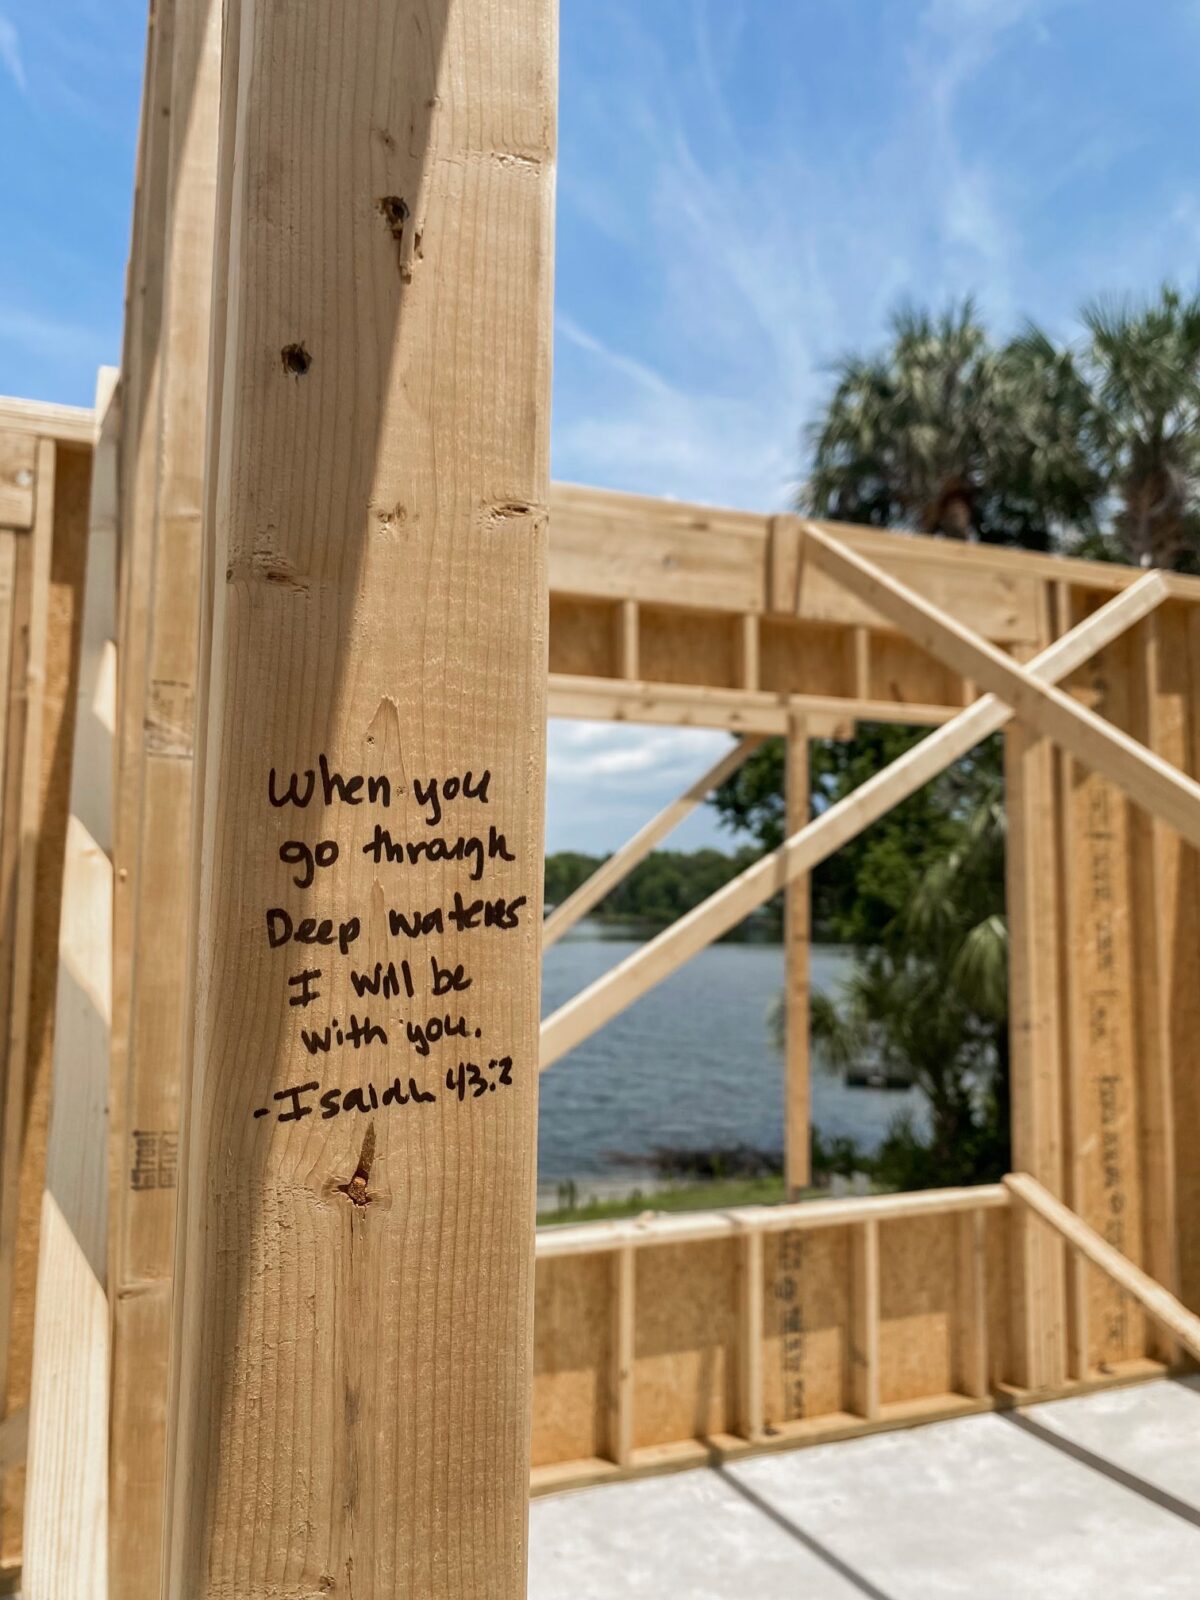 new construction studs with bible verses written
